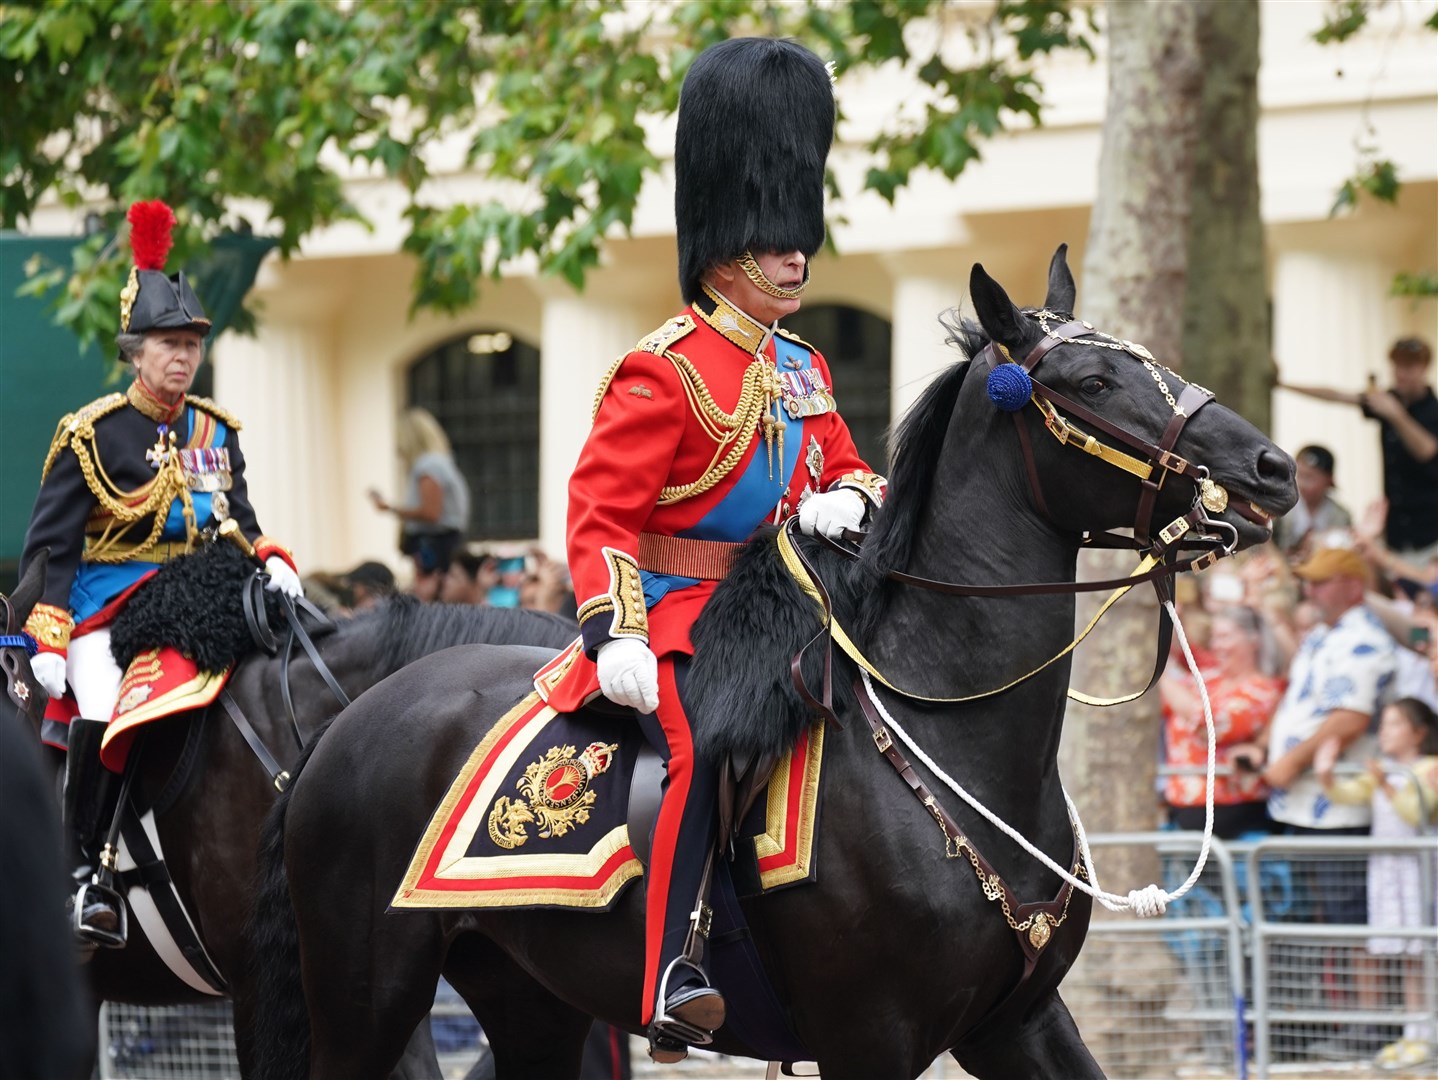 Charles steadies his horse during the procession along The Mall (Yui Mok/PA)